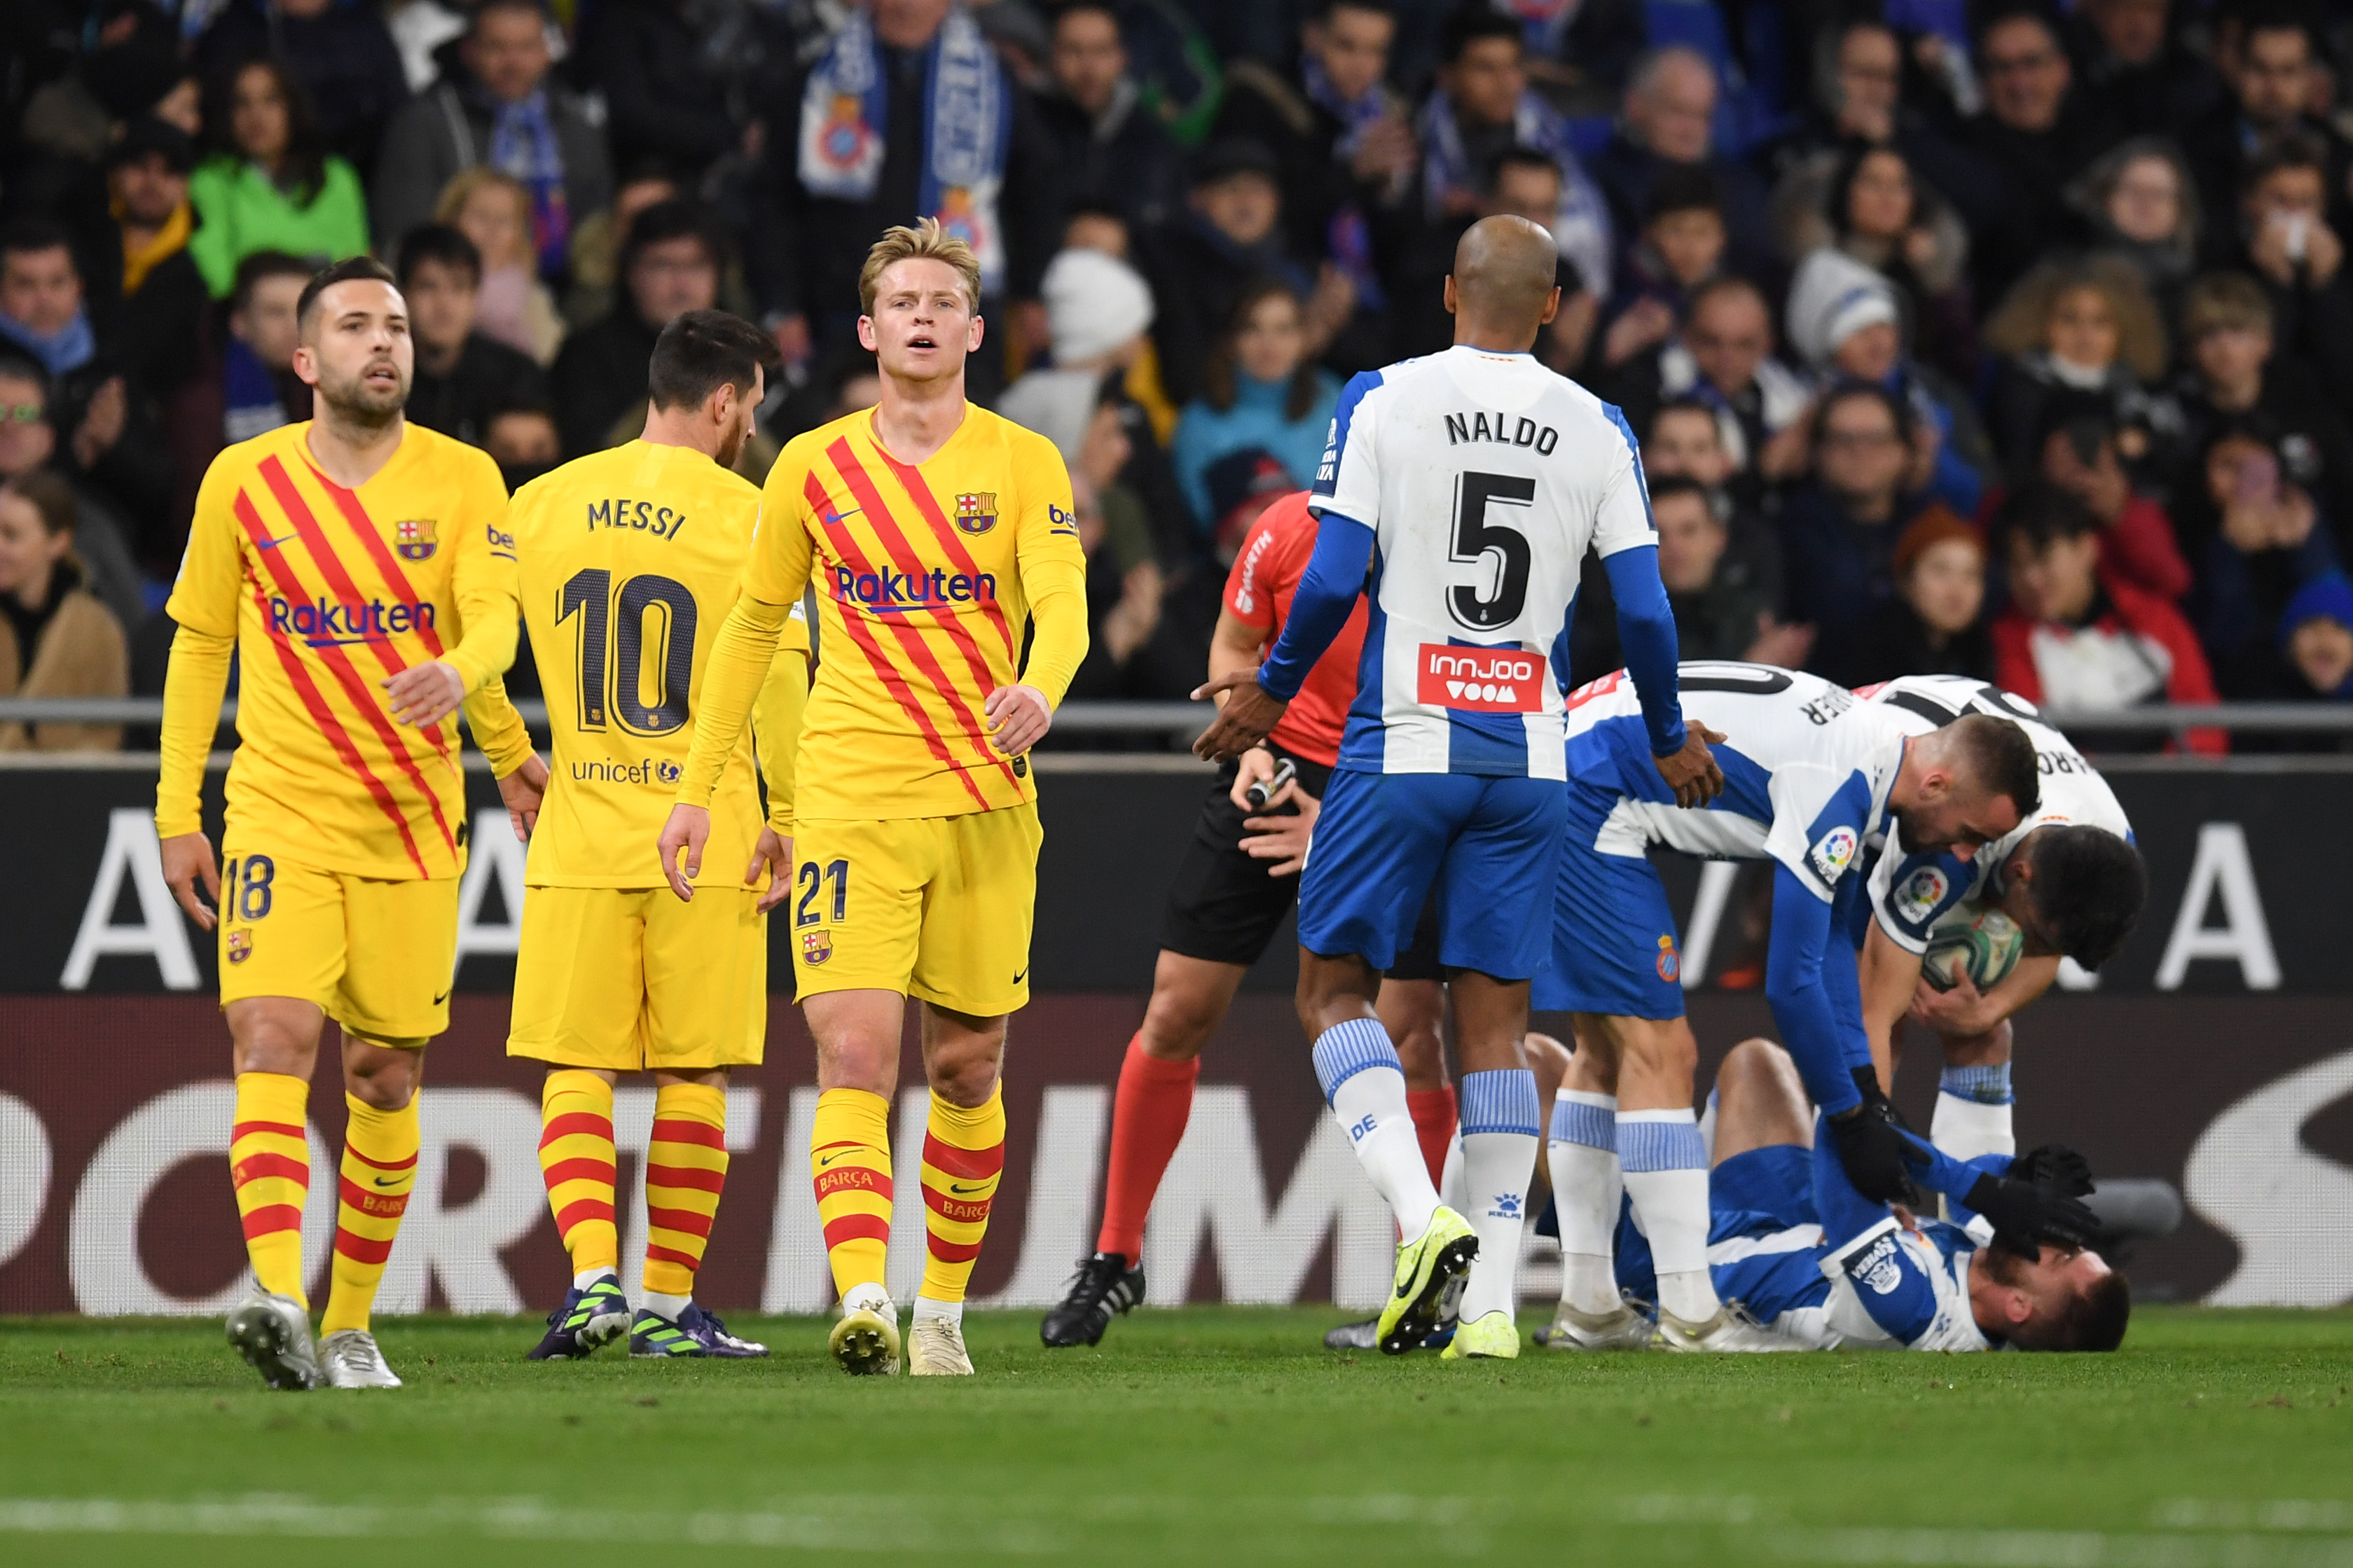 BARCELONA, SPAIN - JANUARY 04: Frenkie de Jong and Jordi Alba of FC Barcelona look dejected as David Lopez of Espanyol celebrates with teammates after scoring his team's first goal during the La Liga match between RCD Espanyol and FC Barcelona at RCDE Stadium on January 04, 2020 in Barcelona, Spain. (Photo by Alex Caparros/Getty Images)